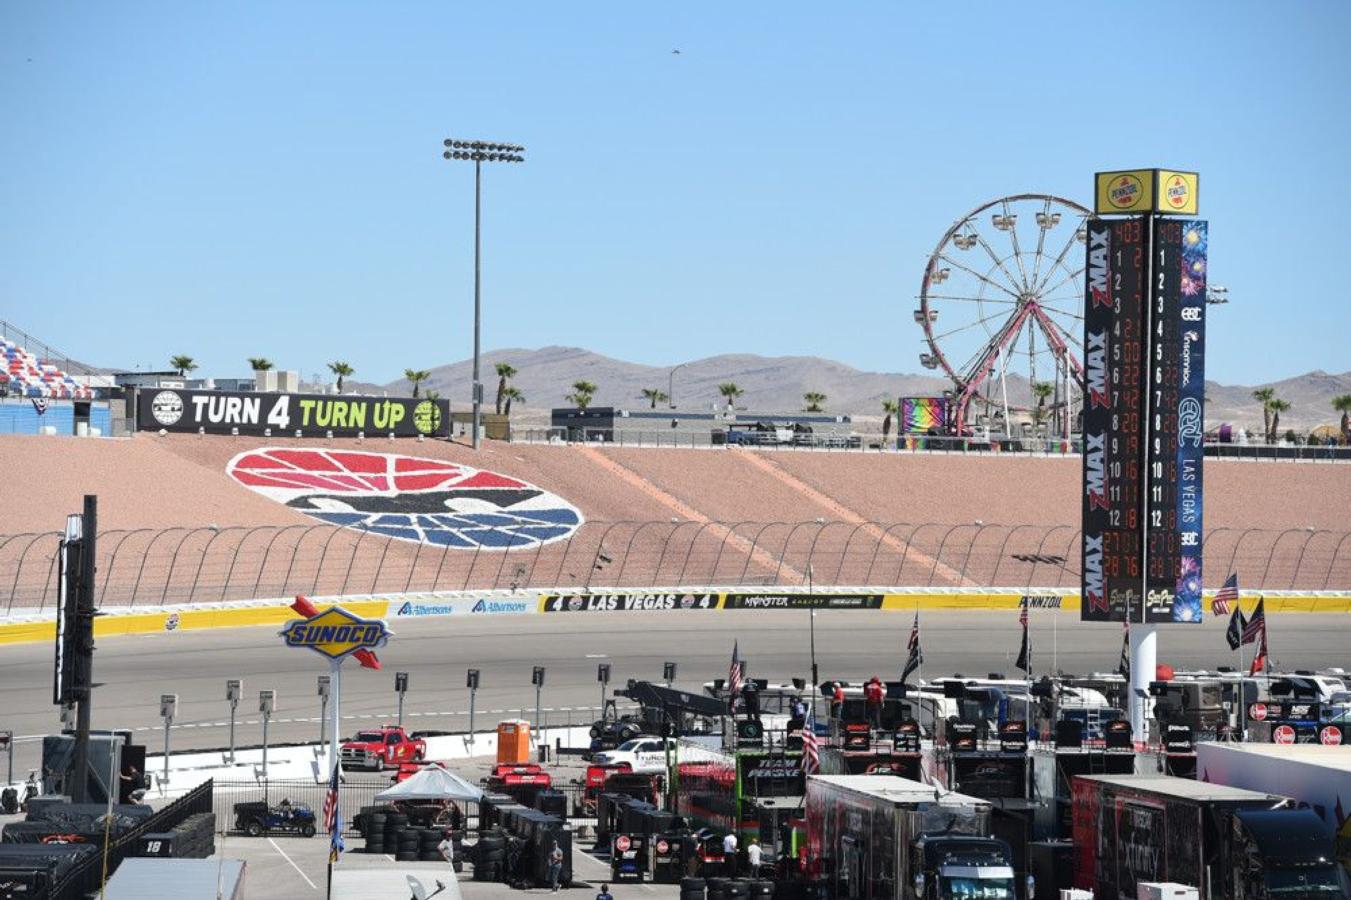 LVMS to provide array of fan activities, experiences during NASCAR Weekend News Media Las Vegas Motor Speedway